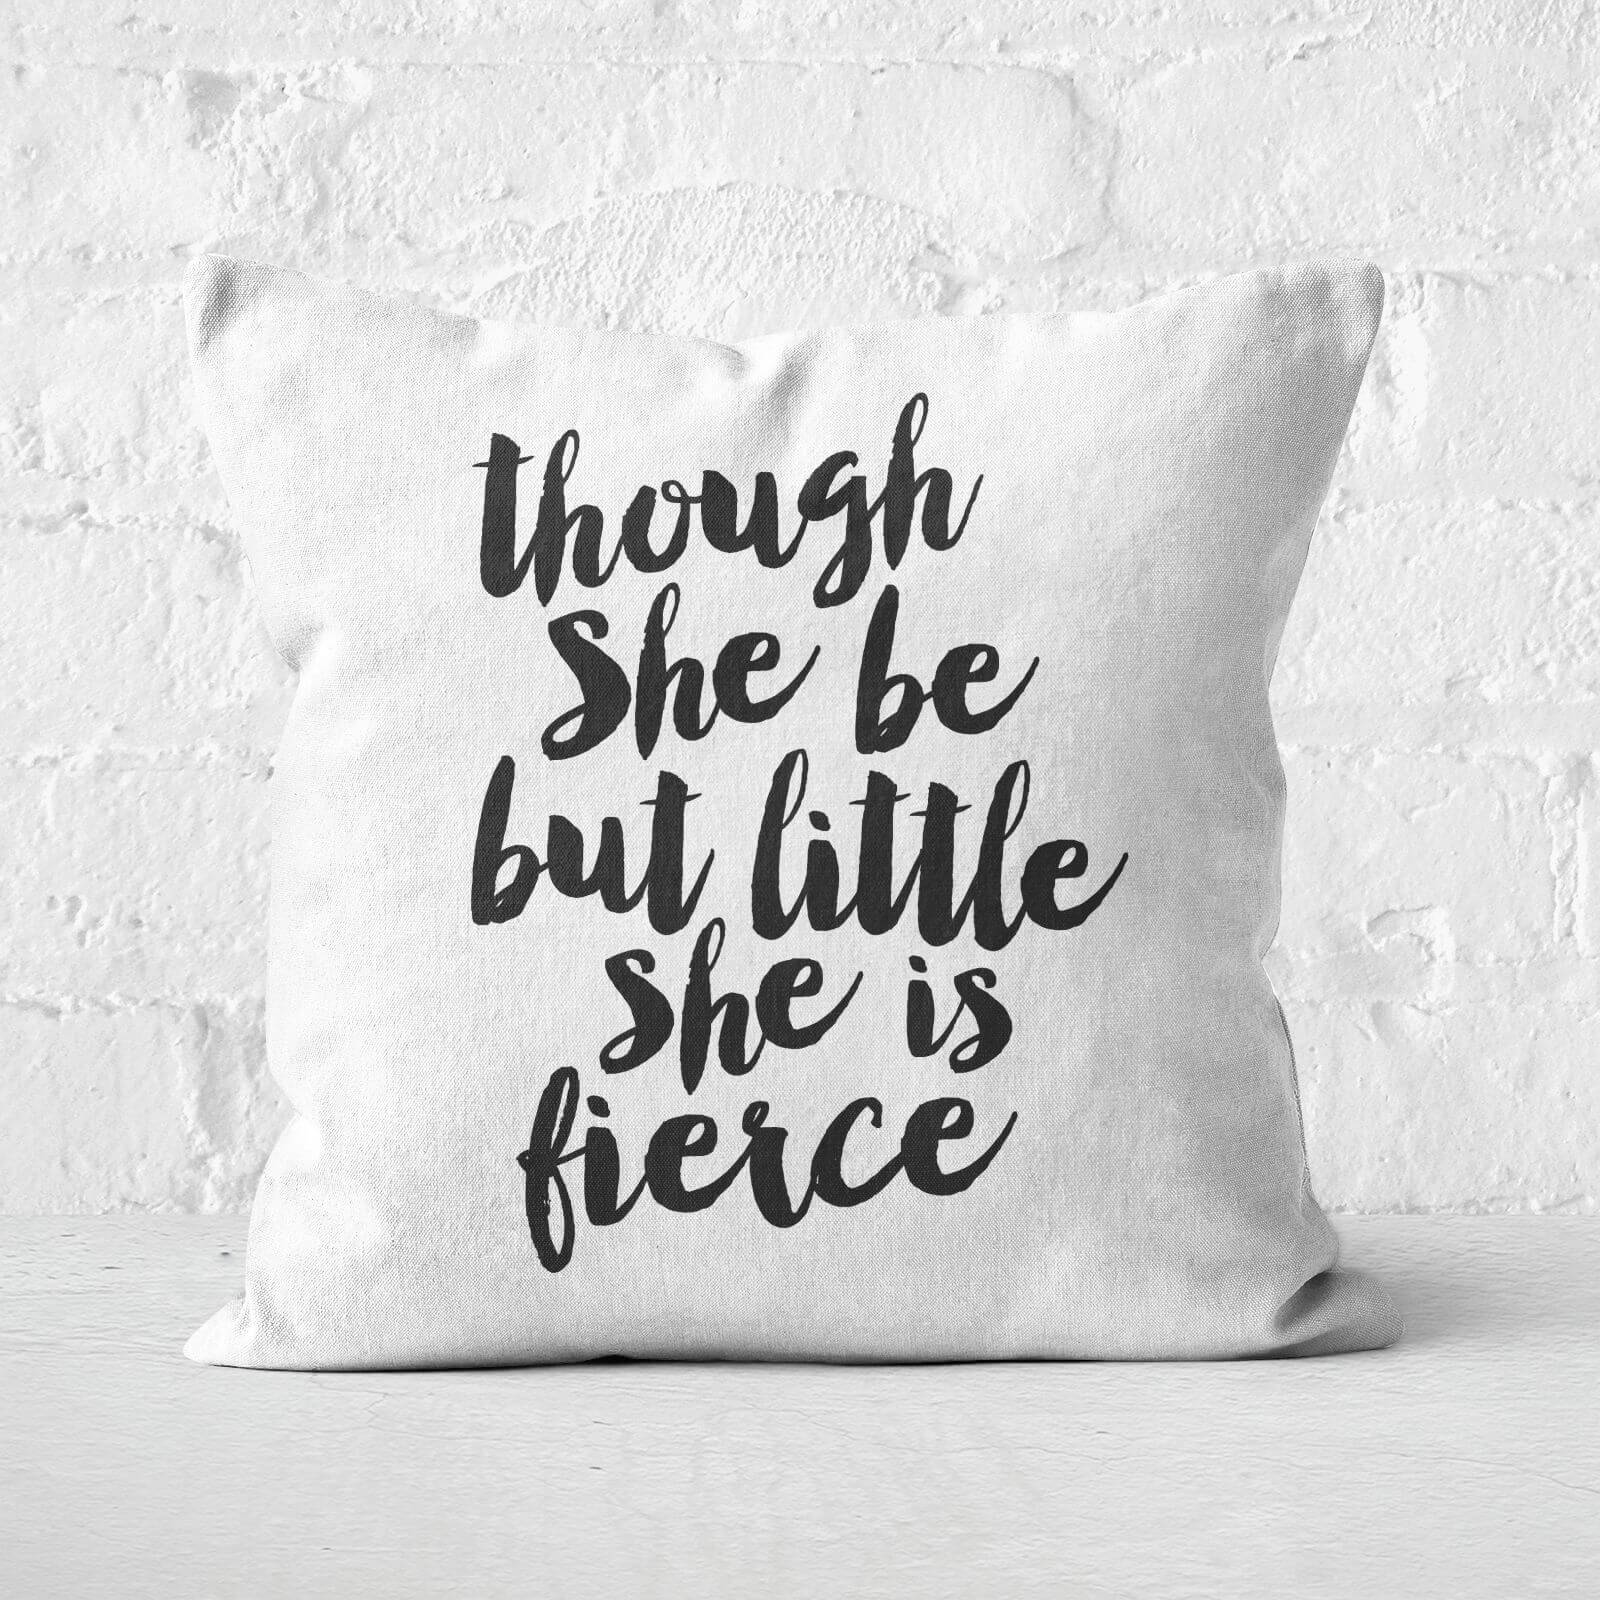 The Motivated Type Though She Be But Little She Is Fierce Square Cushion - 60x60cm - Soft Touch